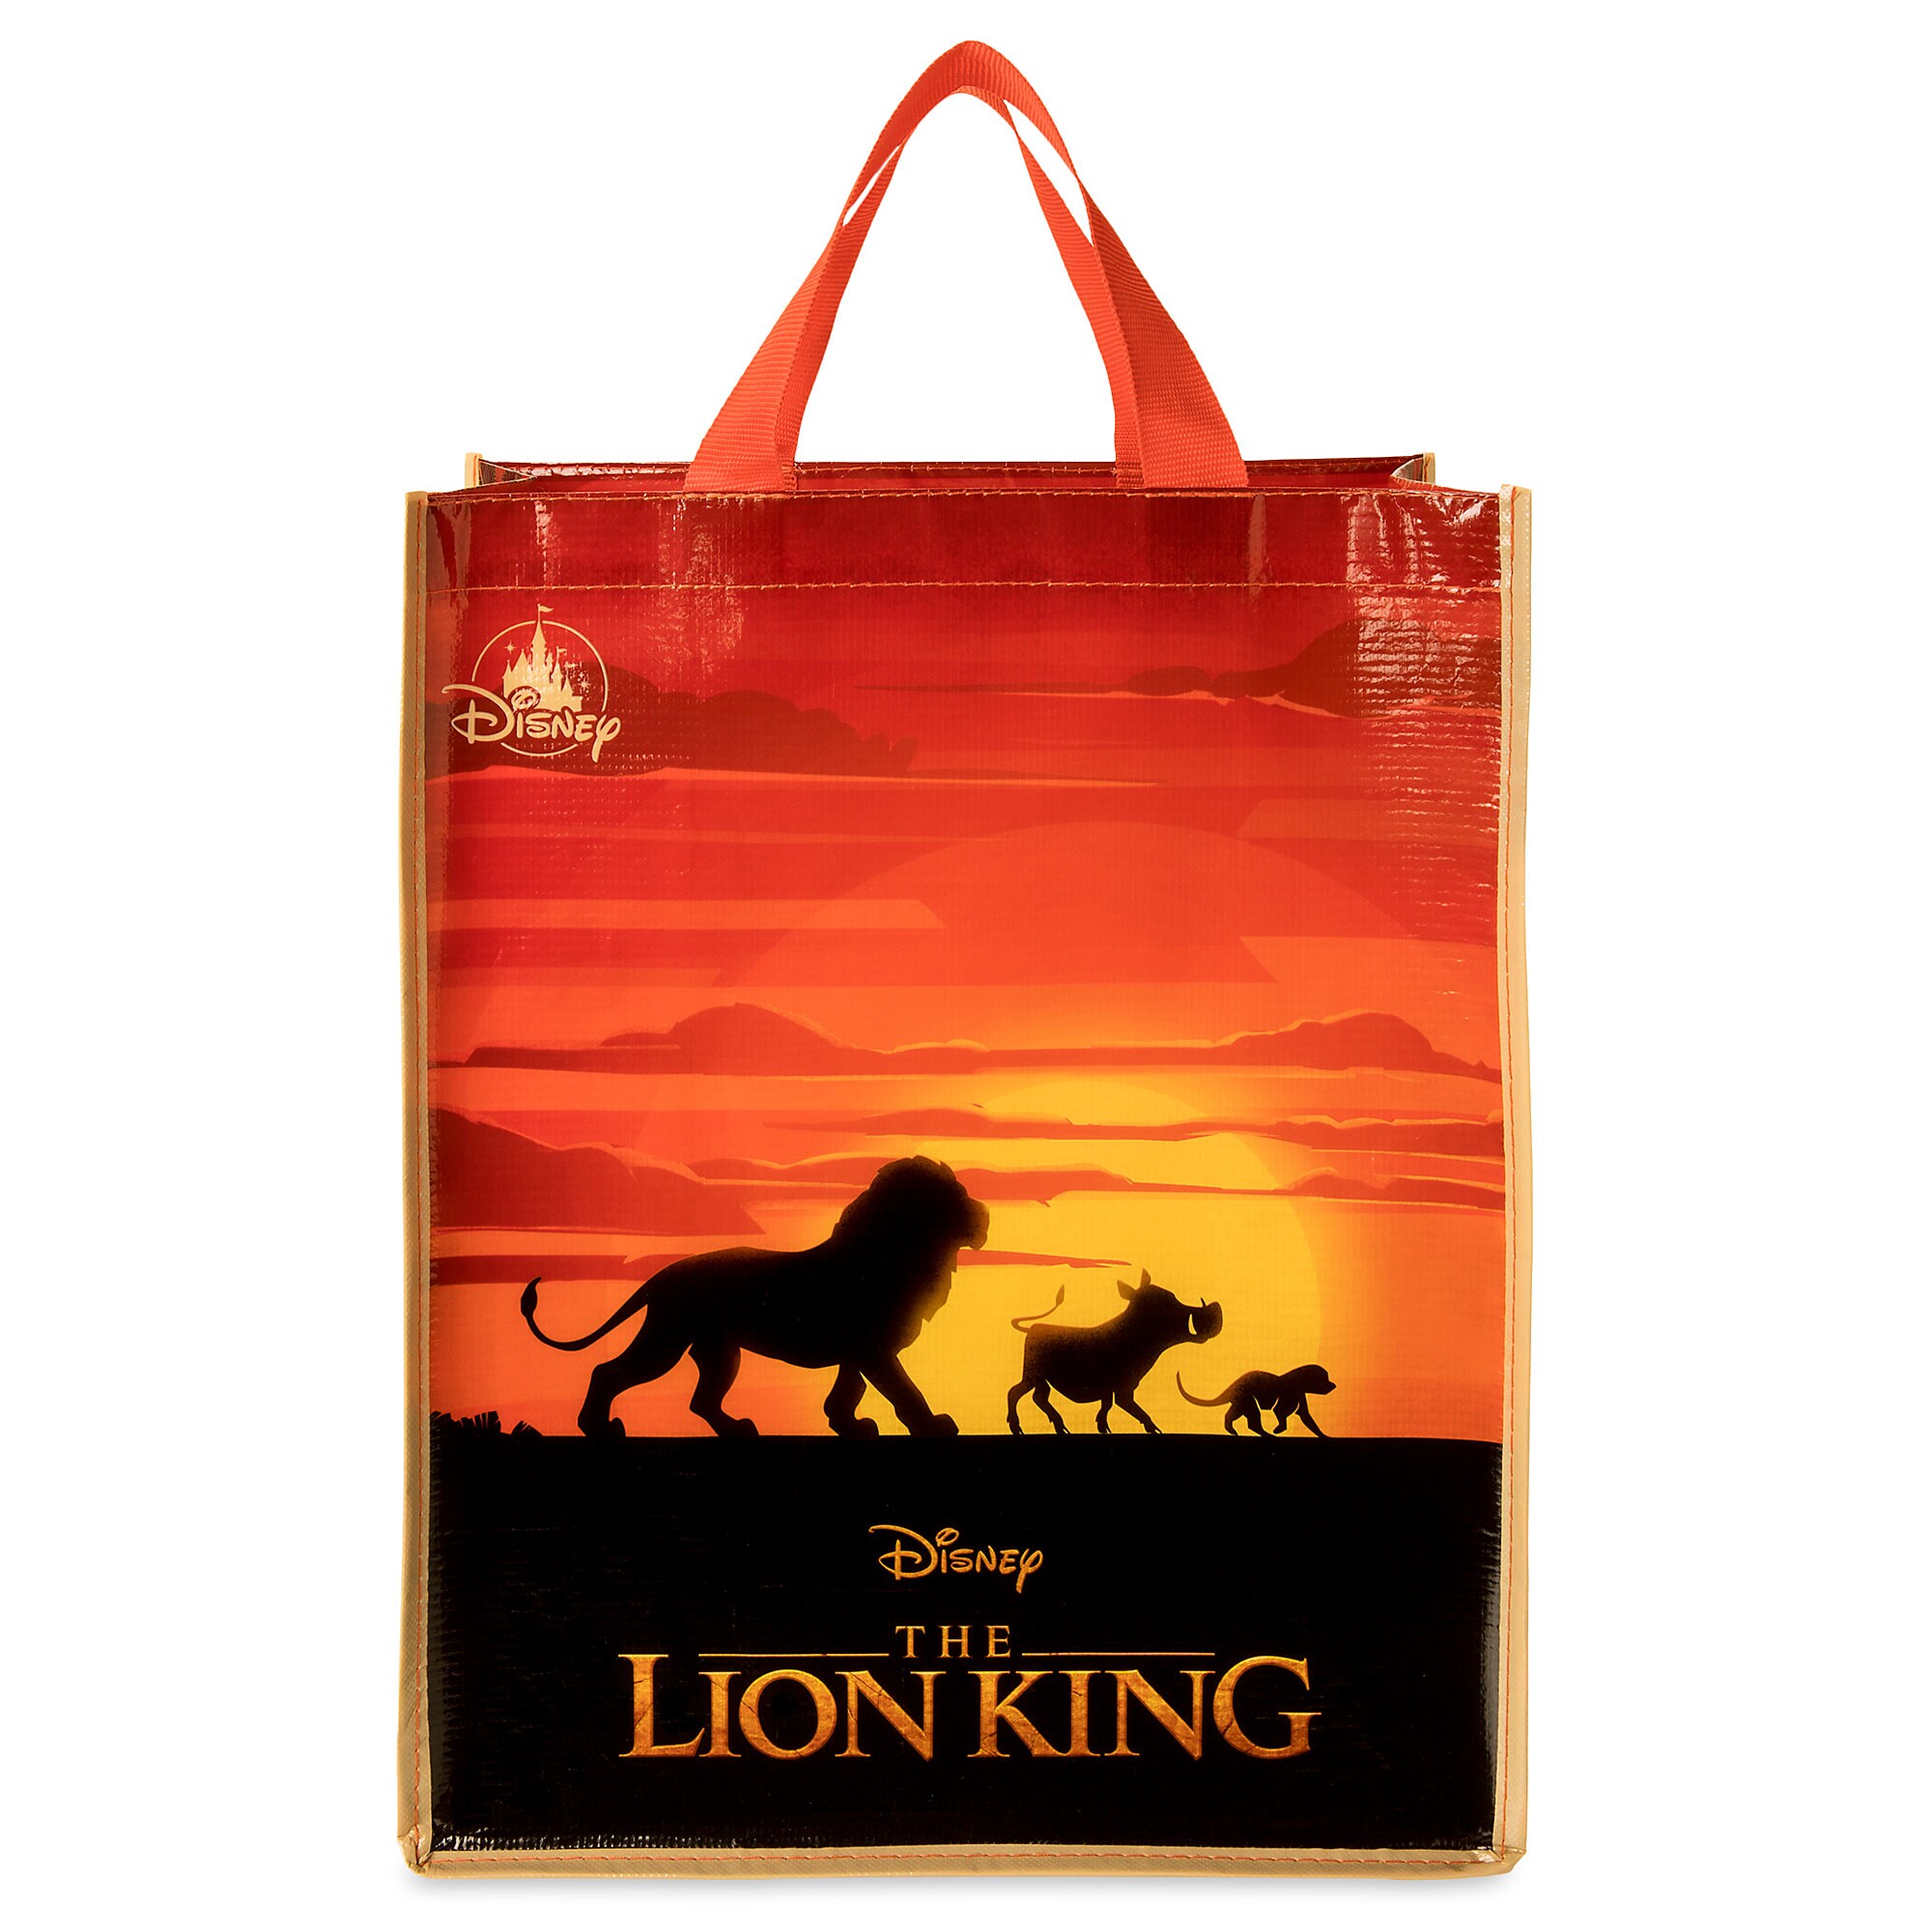 The Lion King Reusable Tote - The Lion King 2019 Film